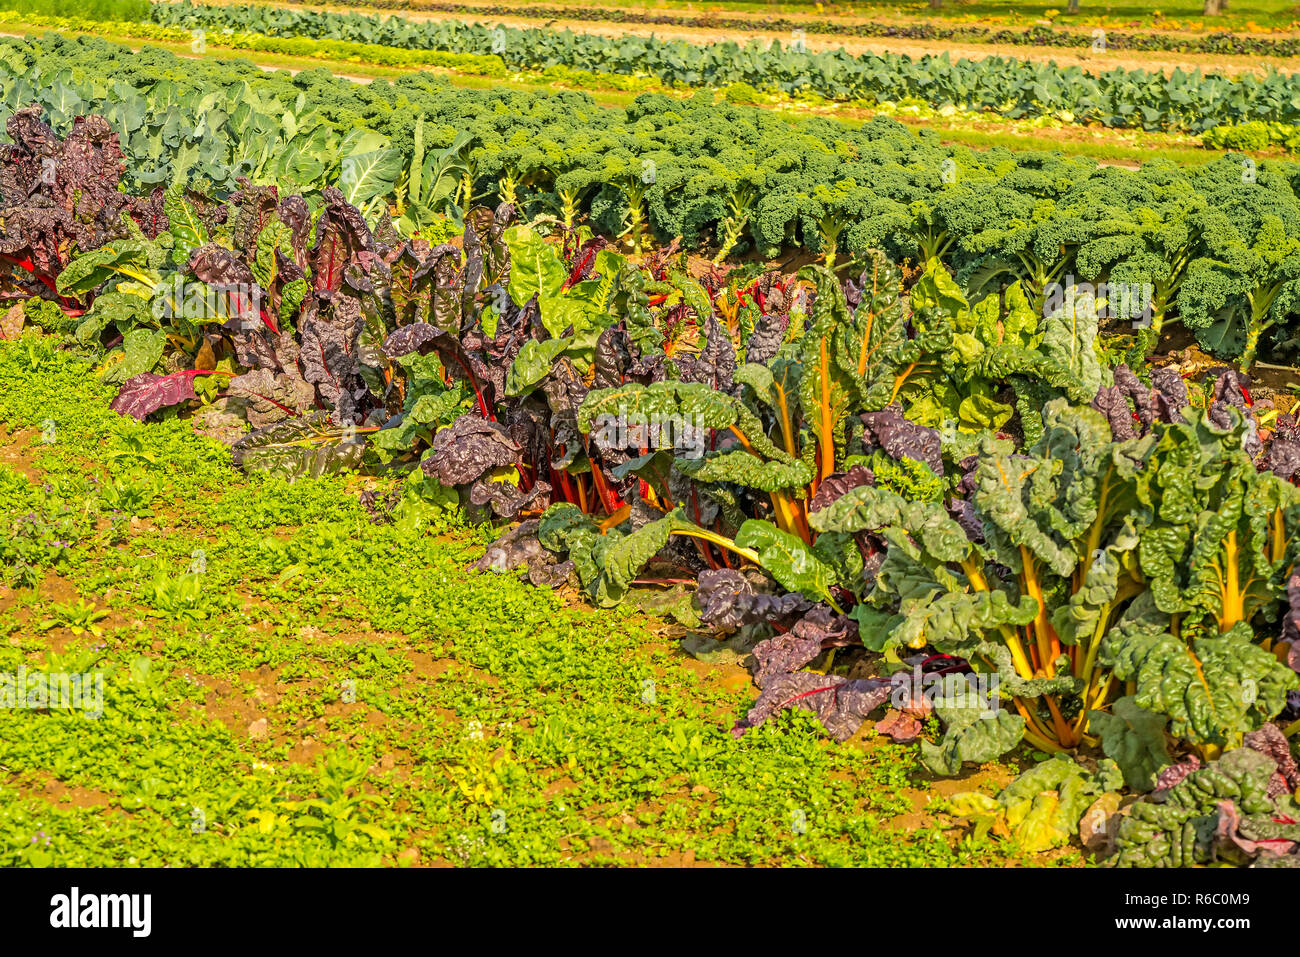 Cultivation Swiss Chard And Green Kale Stock Photo